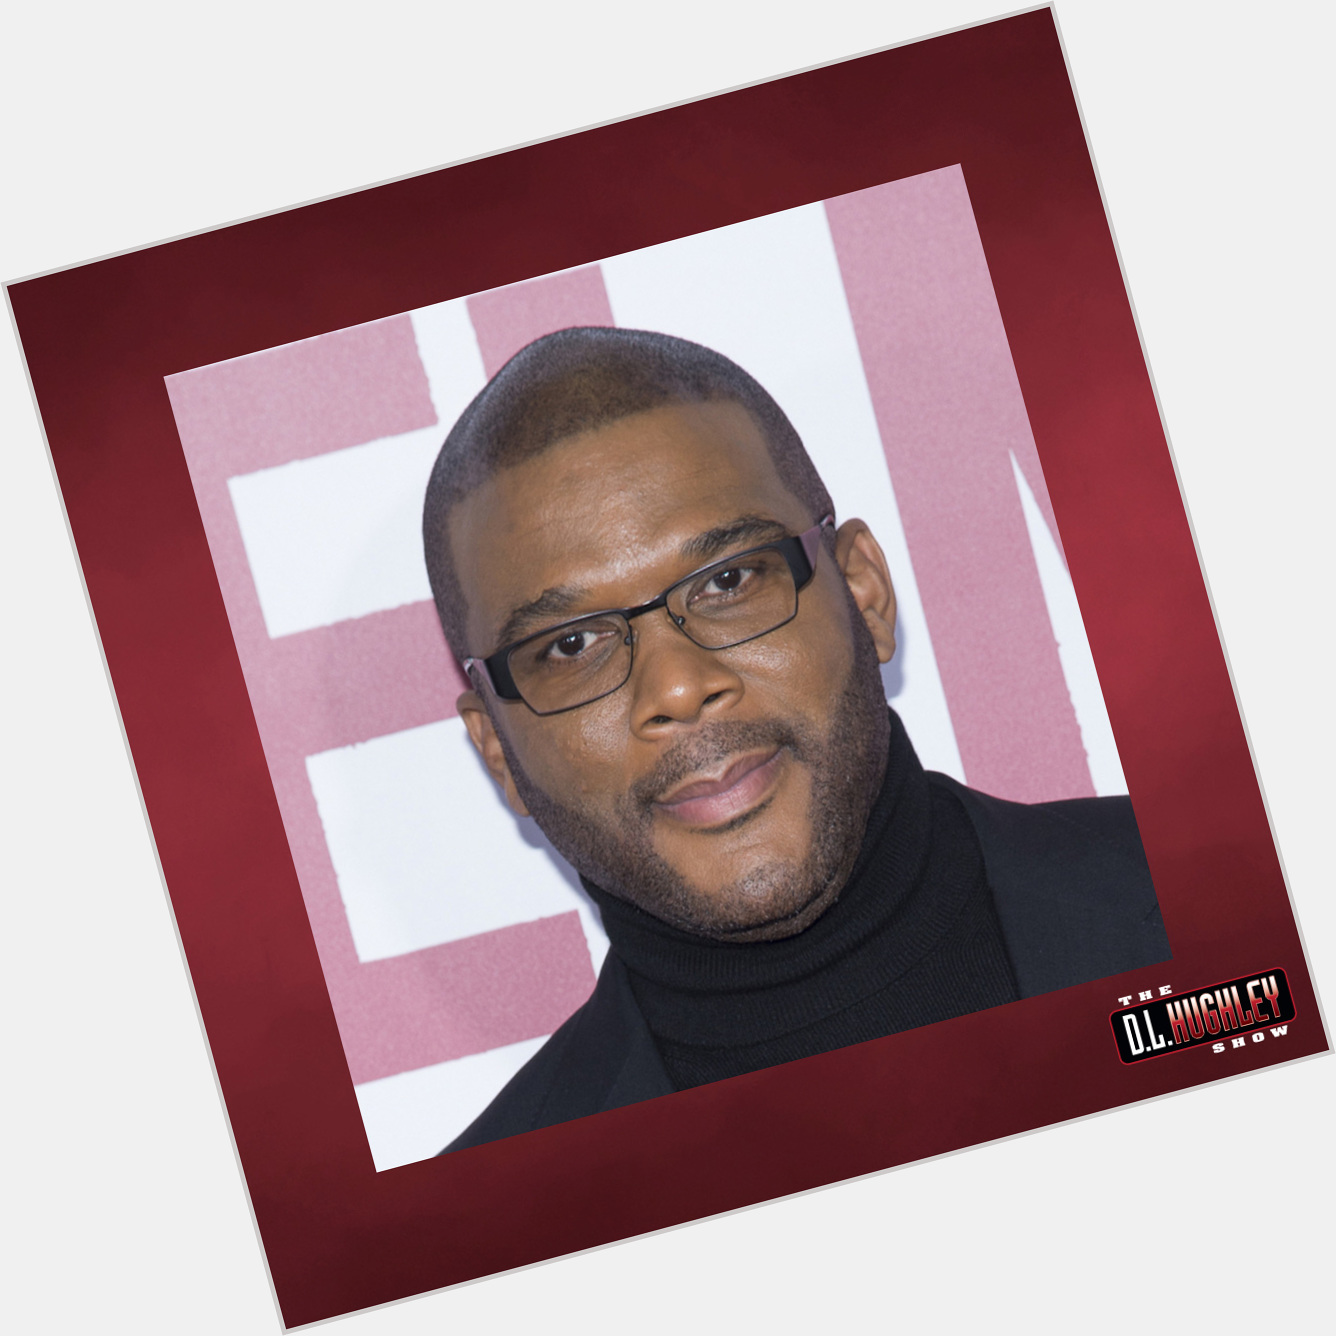 Happy birthday, Tyler Perry! 

What\s your favorite film or TV show of his? 